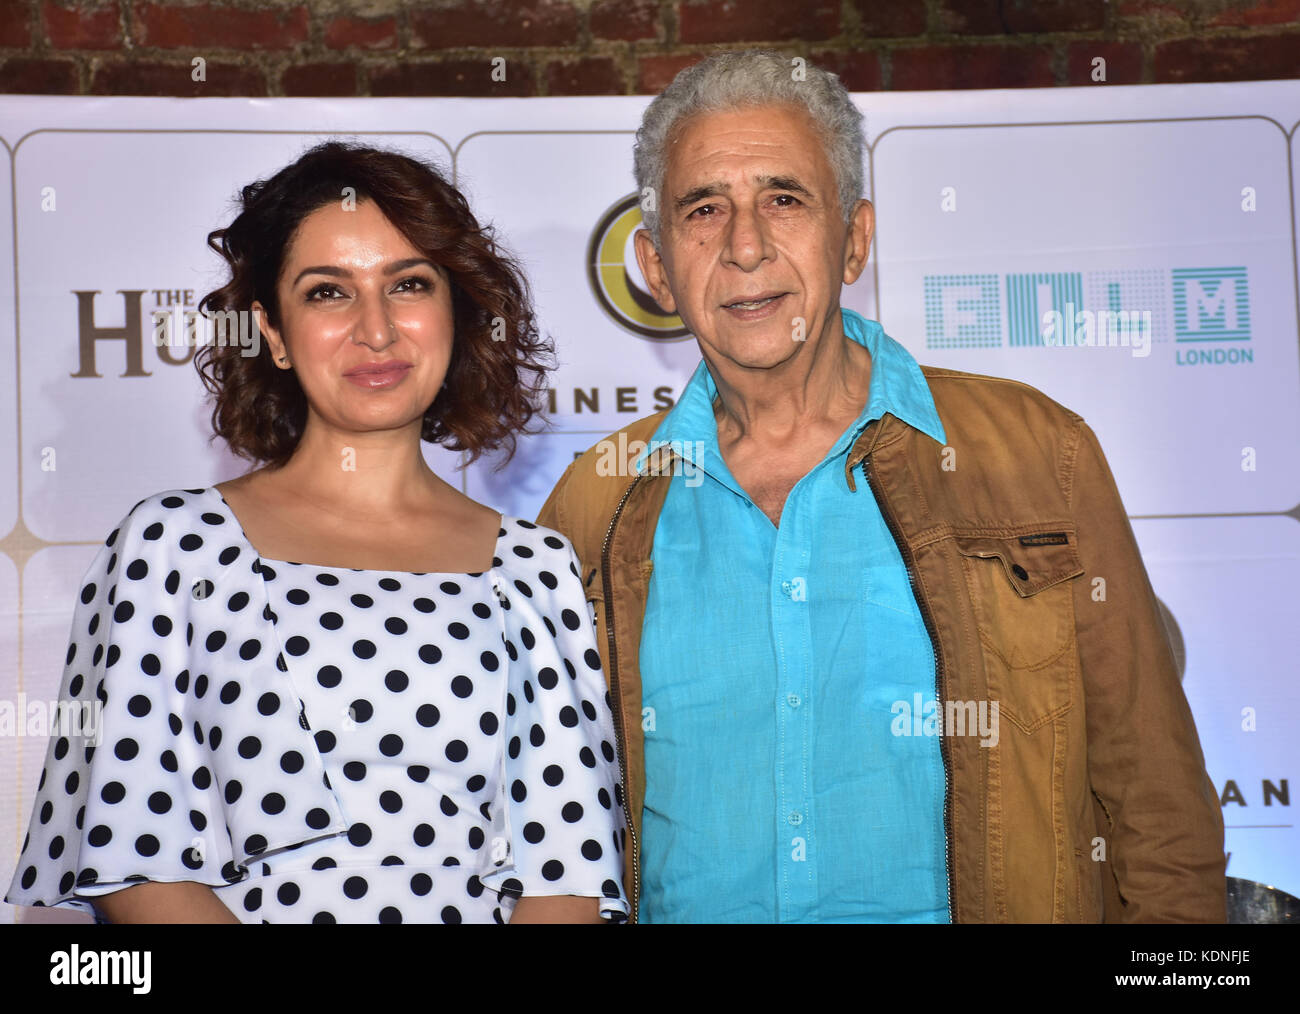 Mumbai, India. 14th Oct, 2017. Indian film actress Tisca Chopra with Naseeruddin Shah at the special press meet before premiere of their film 'The Hungry' at Juhu in Mumbai. Credit: Azhar Khan/Pacific Press/Alamy Live News Stock Photo